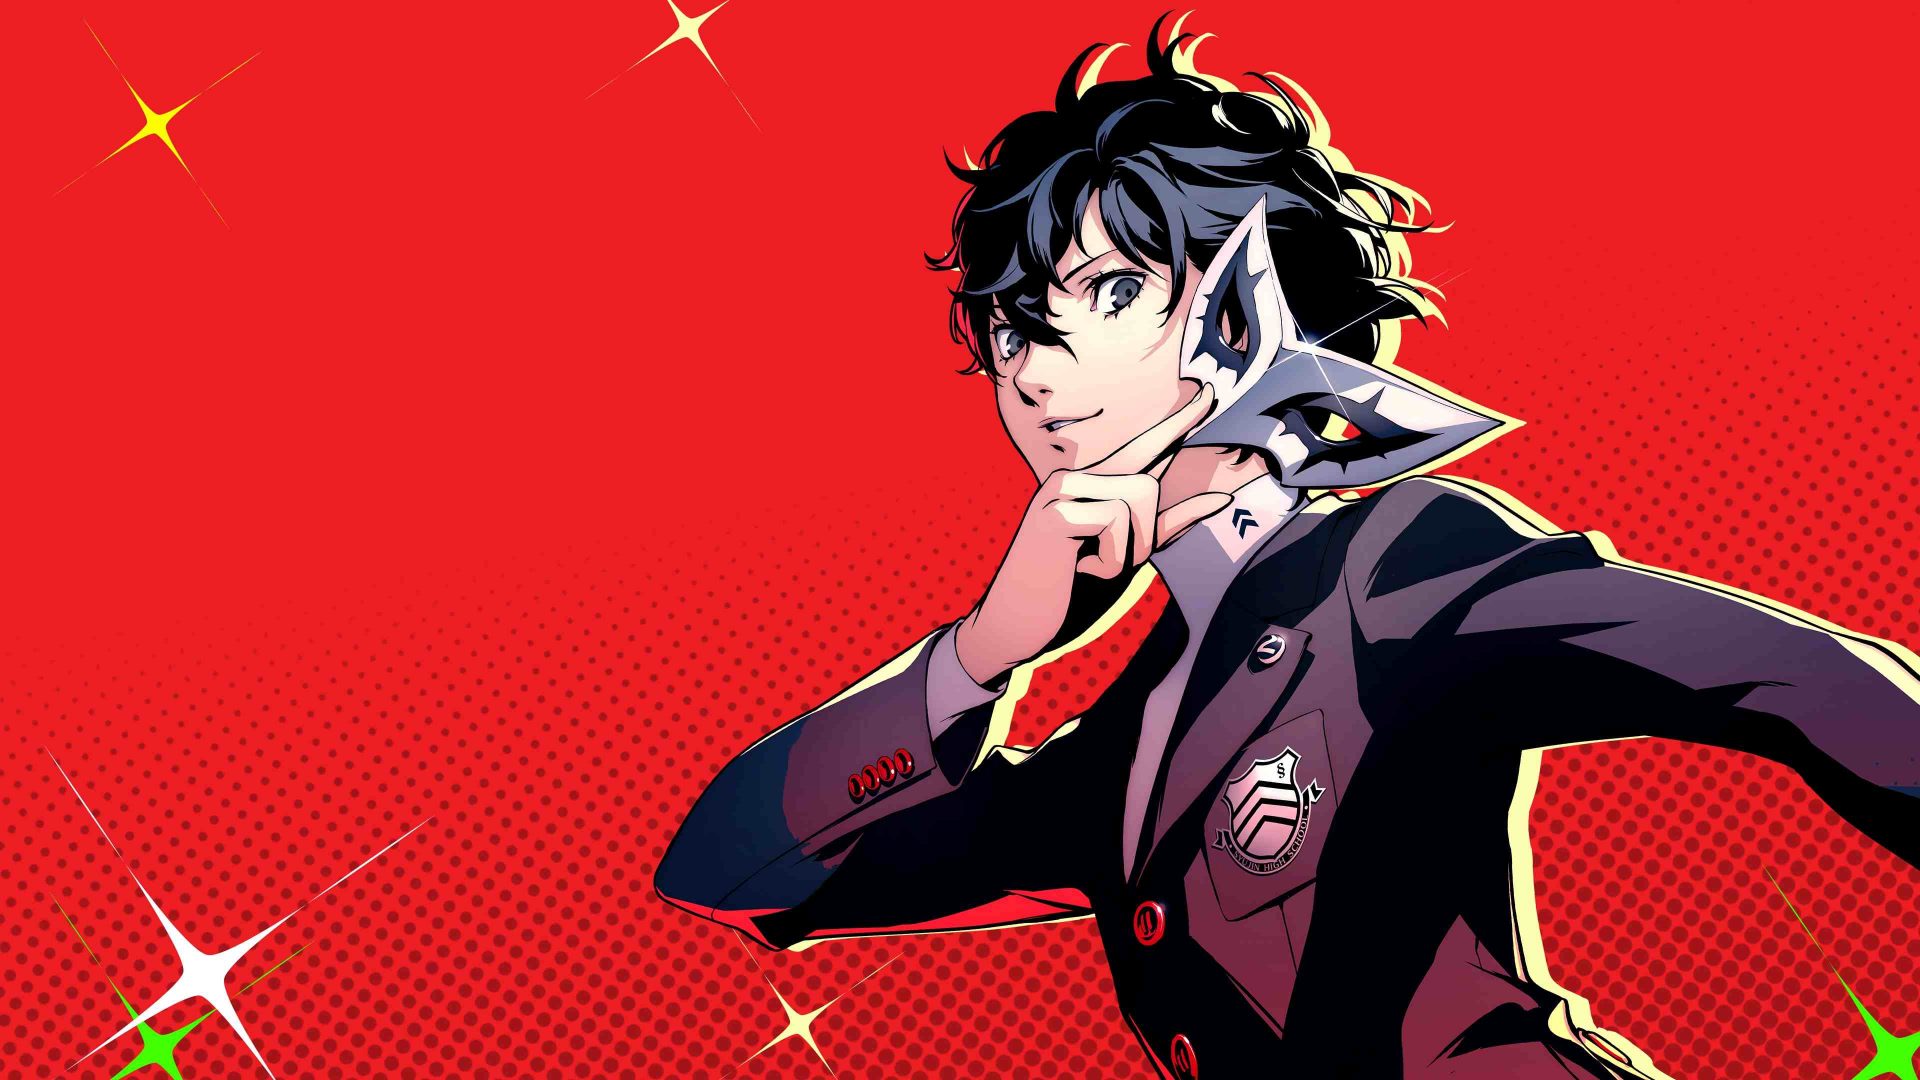 Persona 5 Royal finally hits PC this week and here's why it's still the  JRPG king